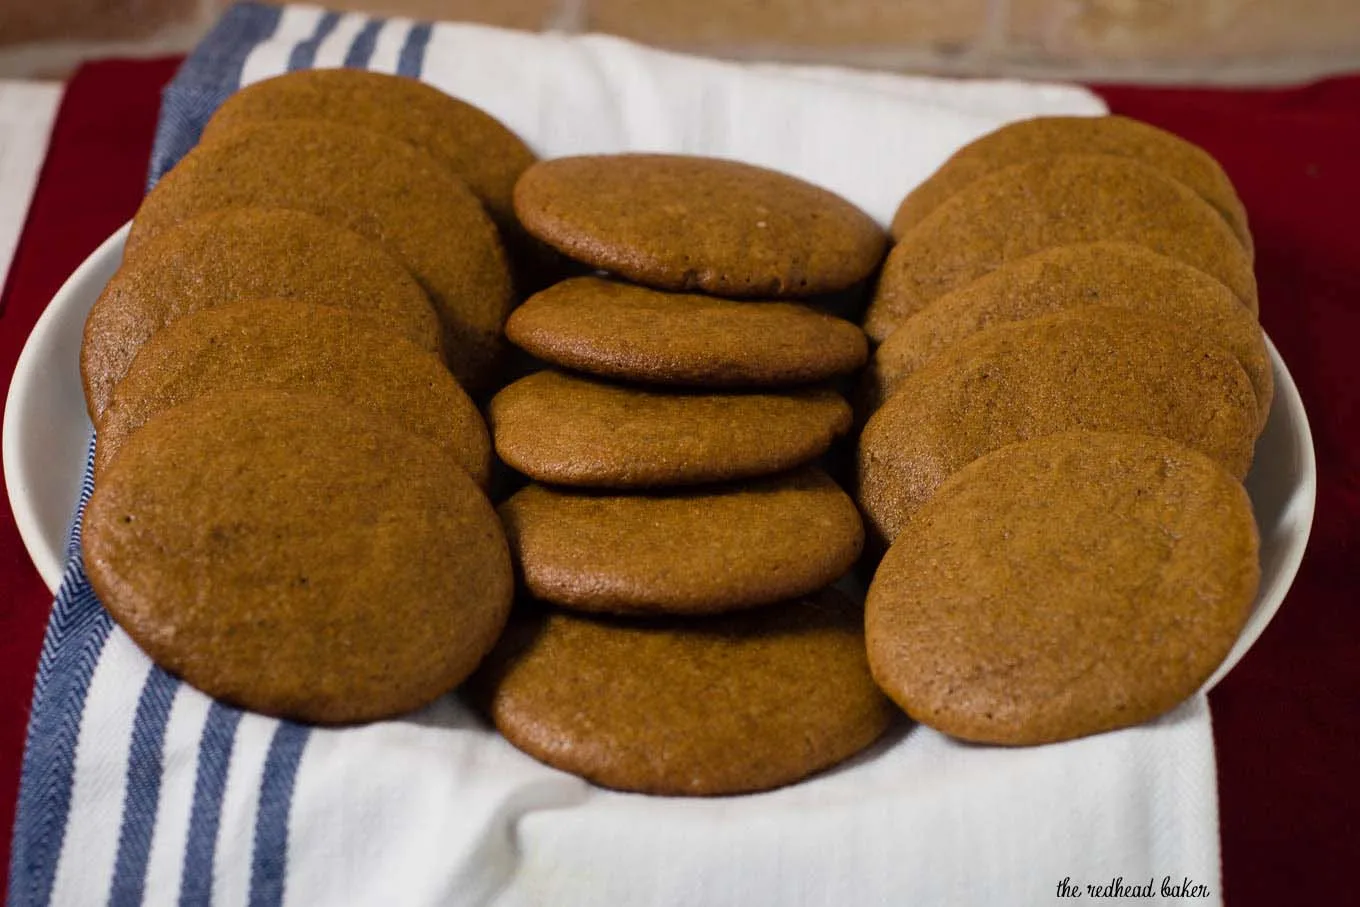 Pepparkakor are Swedish ginger cookies traditionally served at Christmas time. They are less sweet and have a slightly more complex flavor. #ChristmasCookies #InternationalCookies